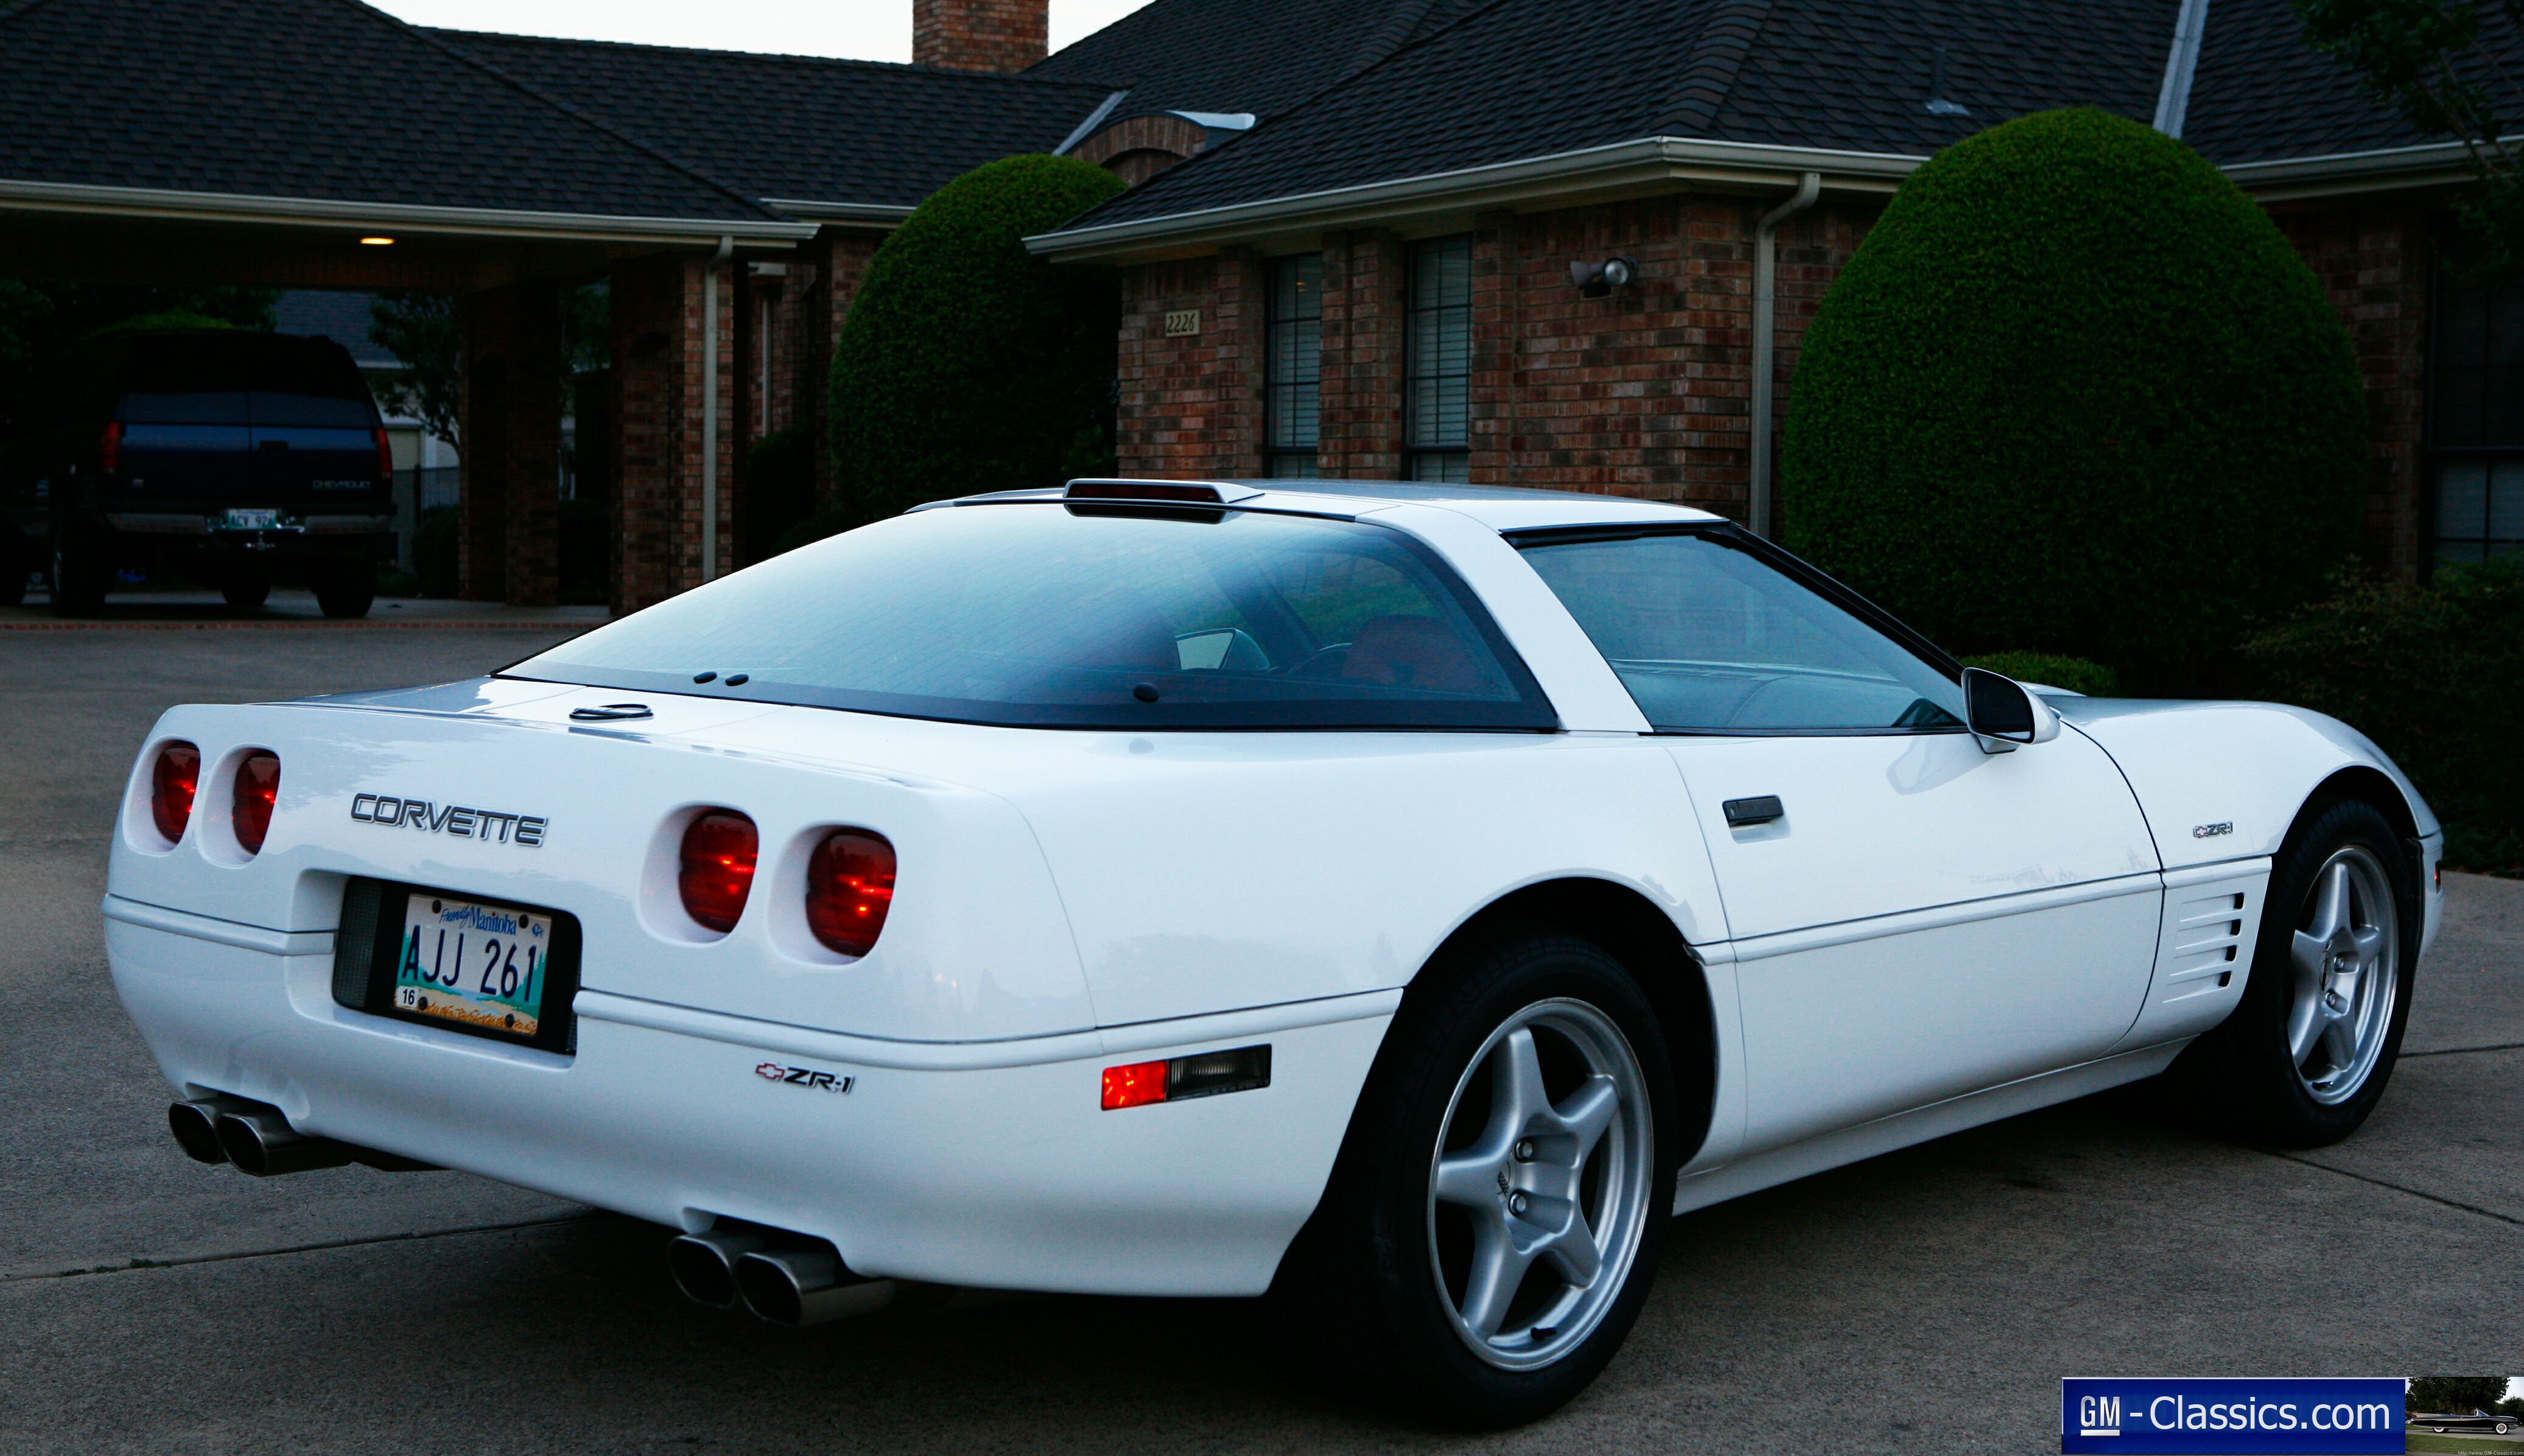 Would You Buy This Zr1 Car Wallpaper